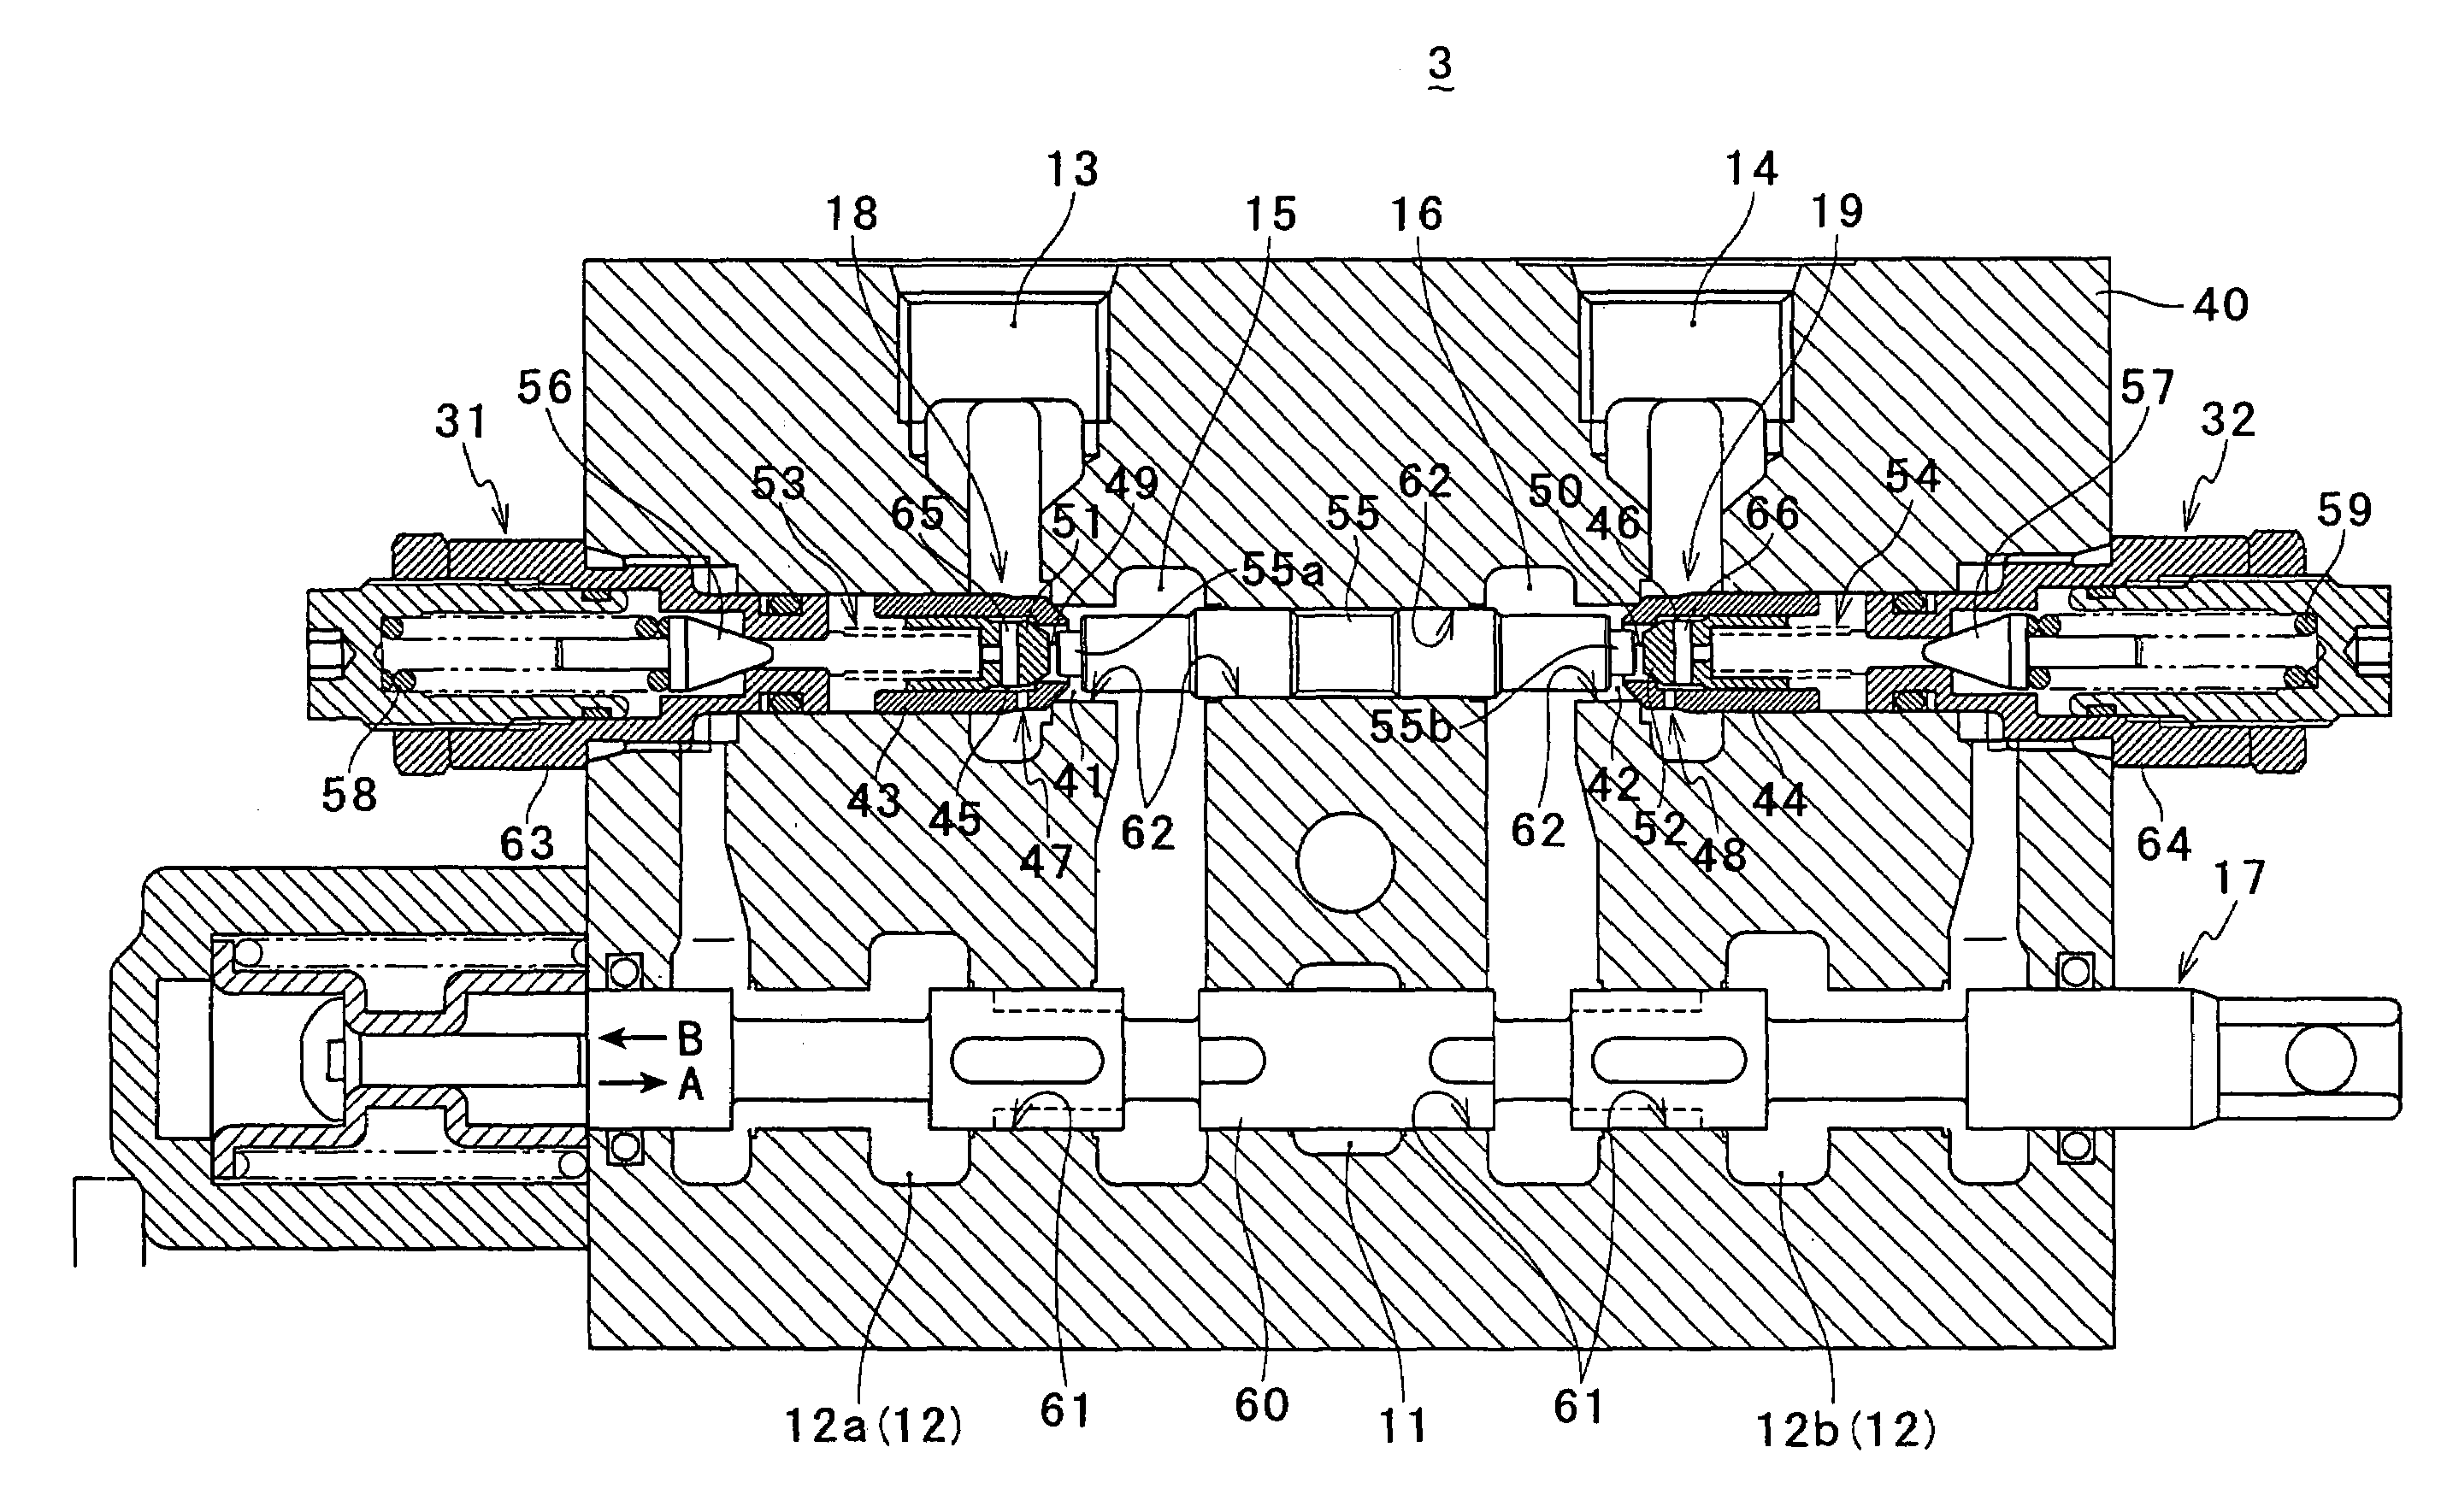 Hydraulic circuit and its valve gear